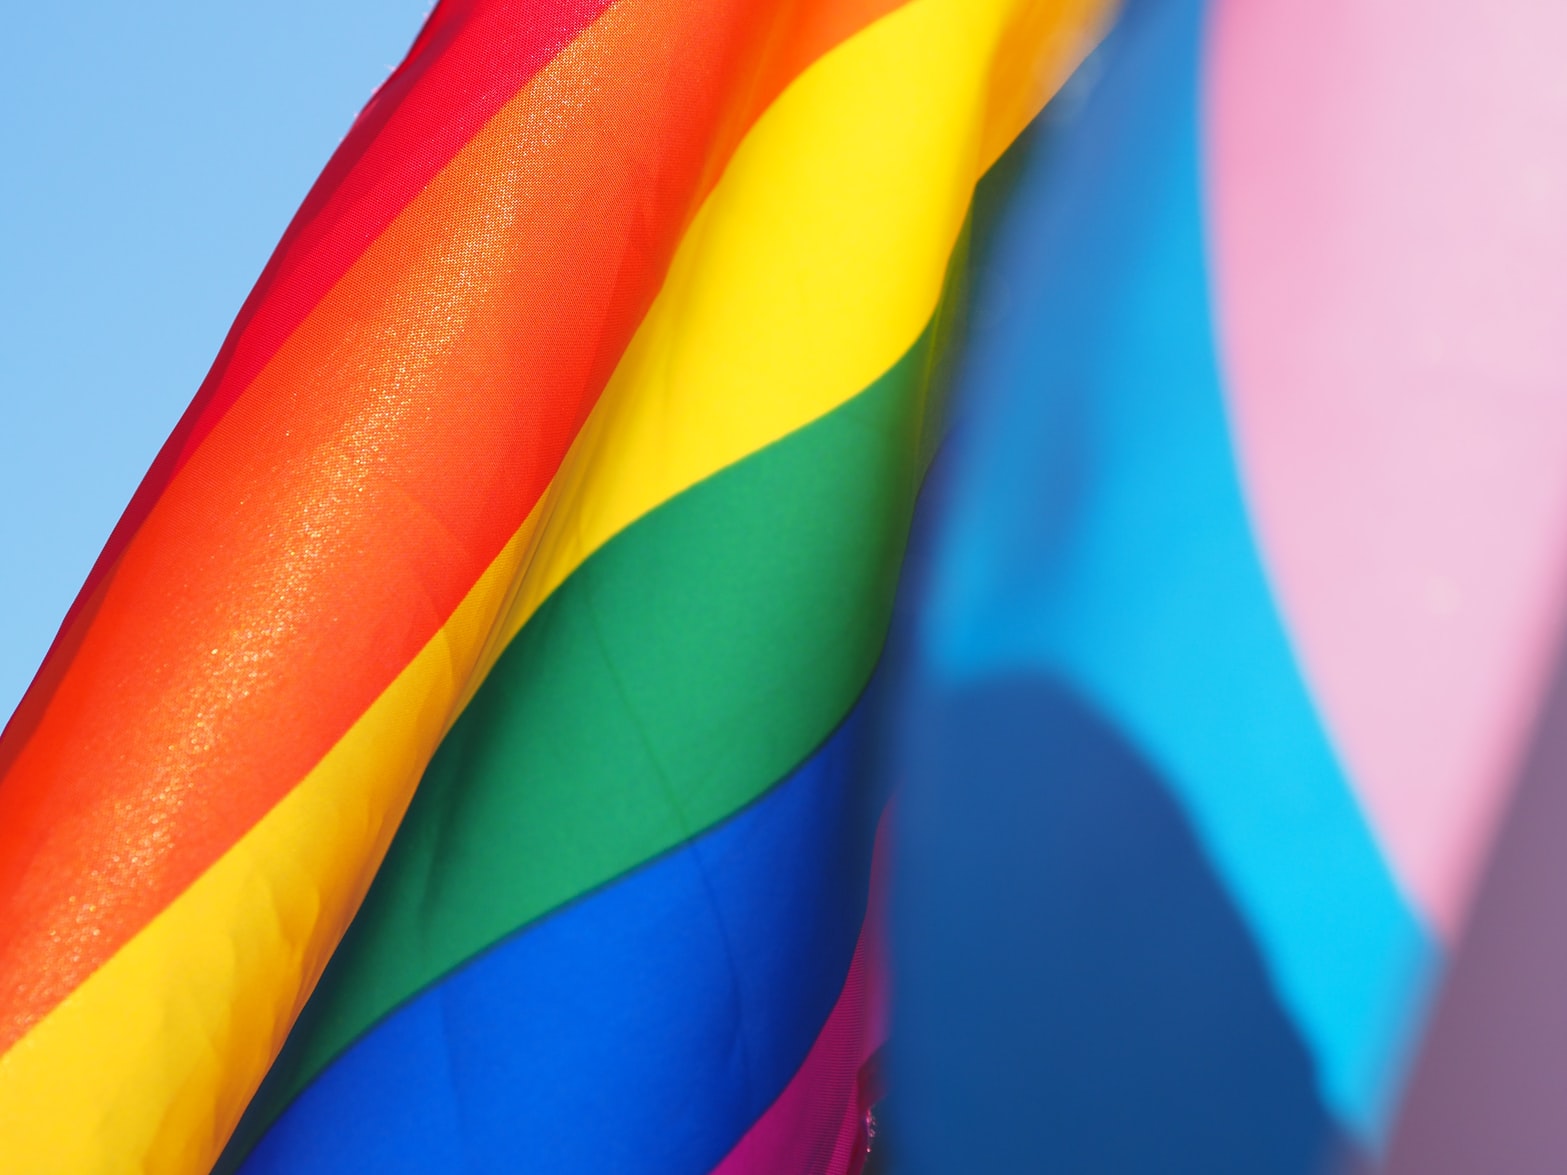 Joint Statement On 25th Budapest Pride Festival By Embassies in Hungary